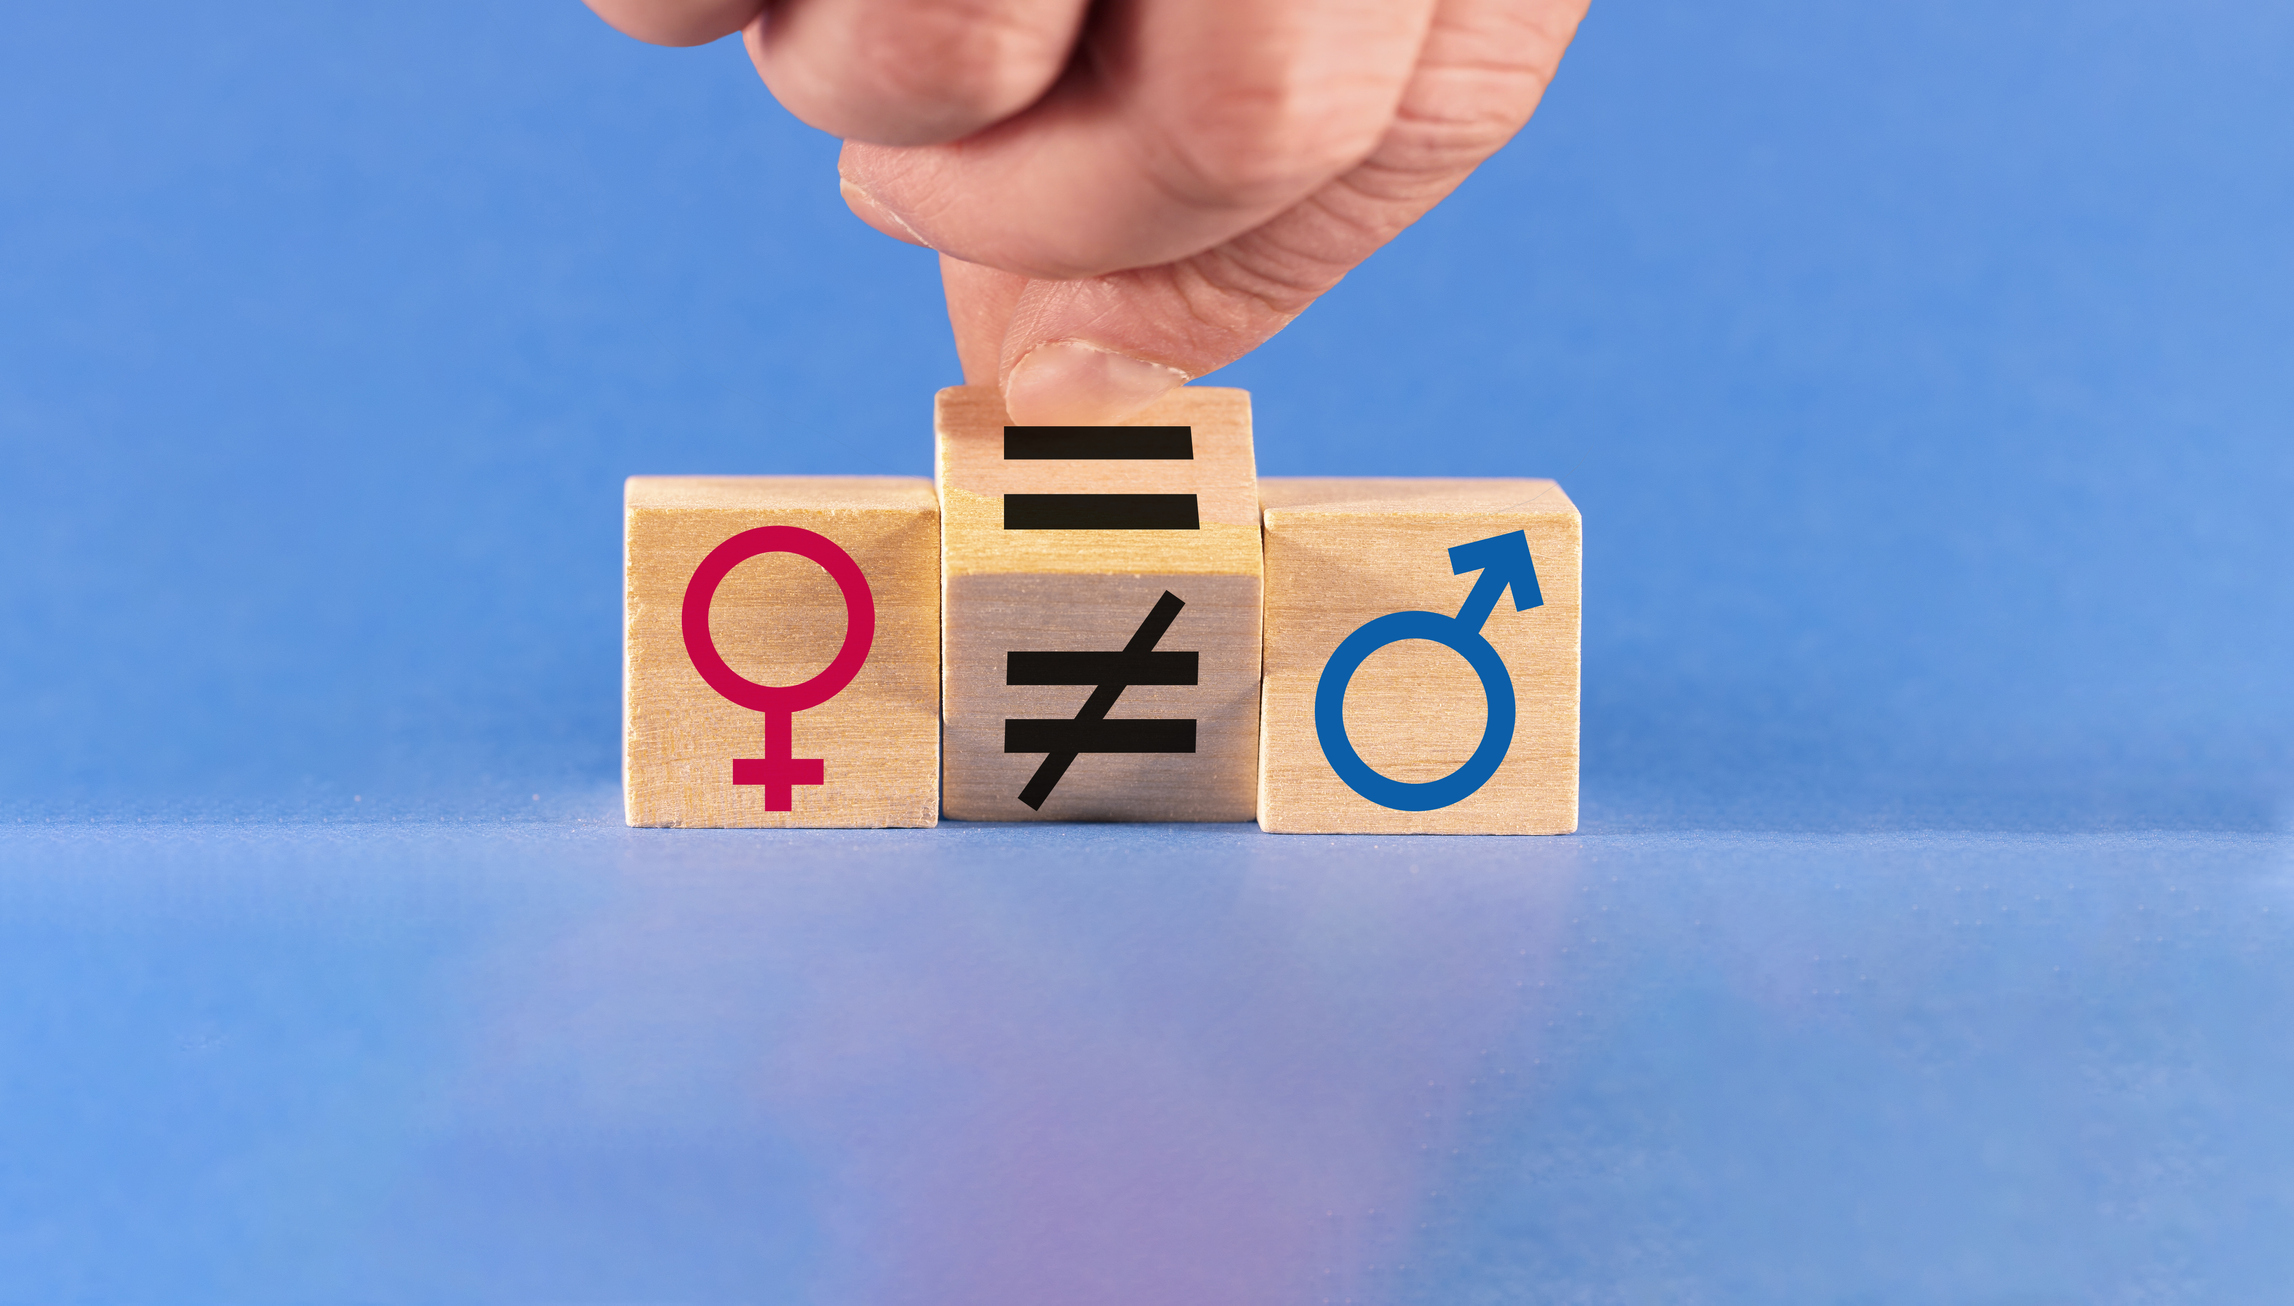 Concept of gender equality. A hand changes an unequal sign to an equal sign between male and female symbols.